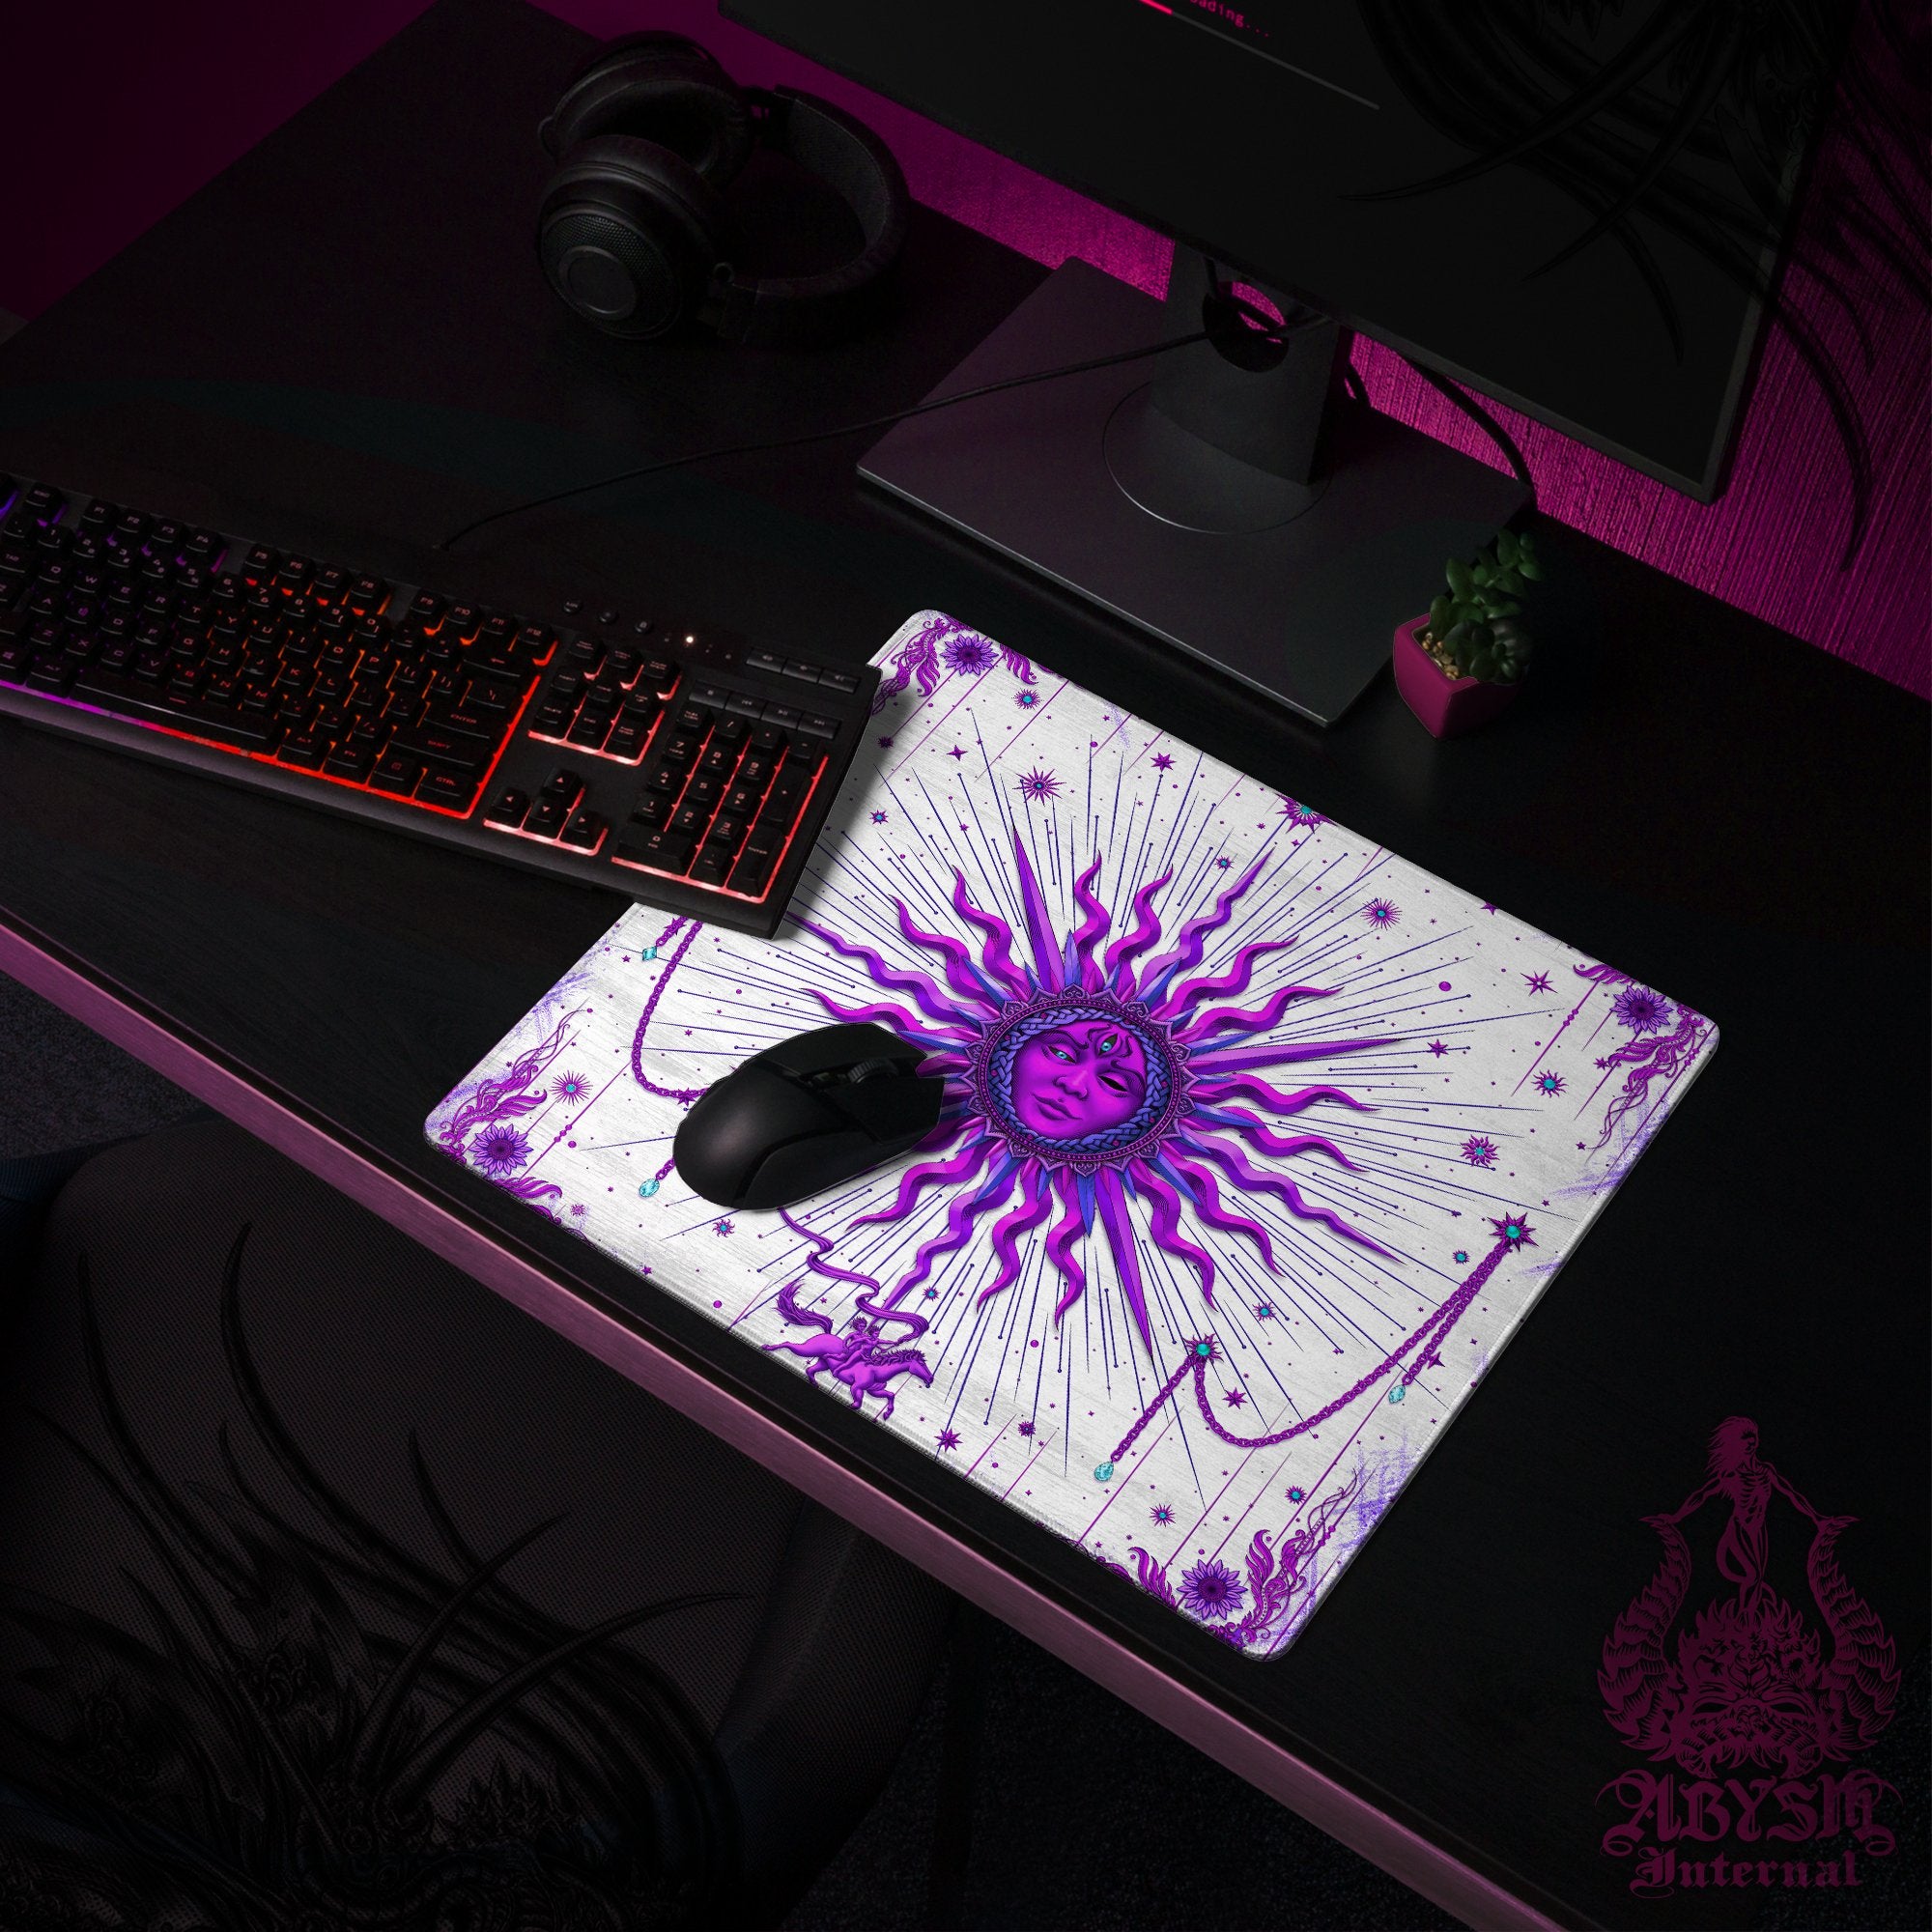 White Goth Workpad, Purple Sun Desk Mat, Tarot Arcana Gaming Mouse Pad, Witchy Table Protector Cover, Witch Room, Esoteric Art Print - Abysm Internal